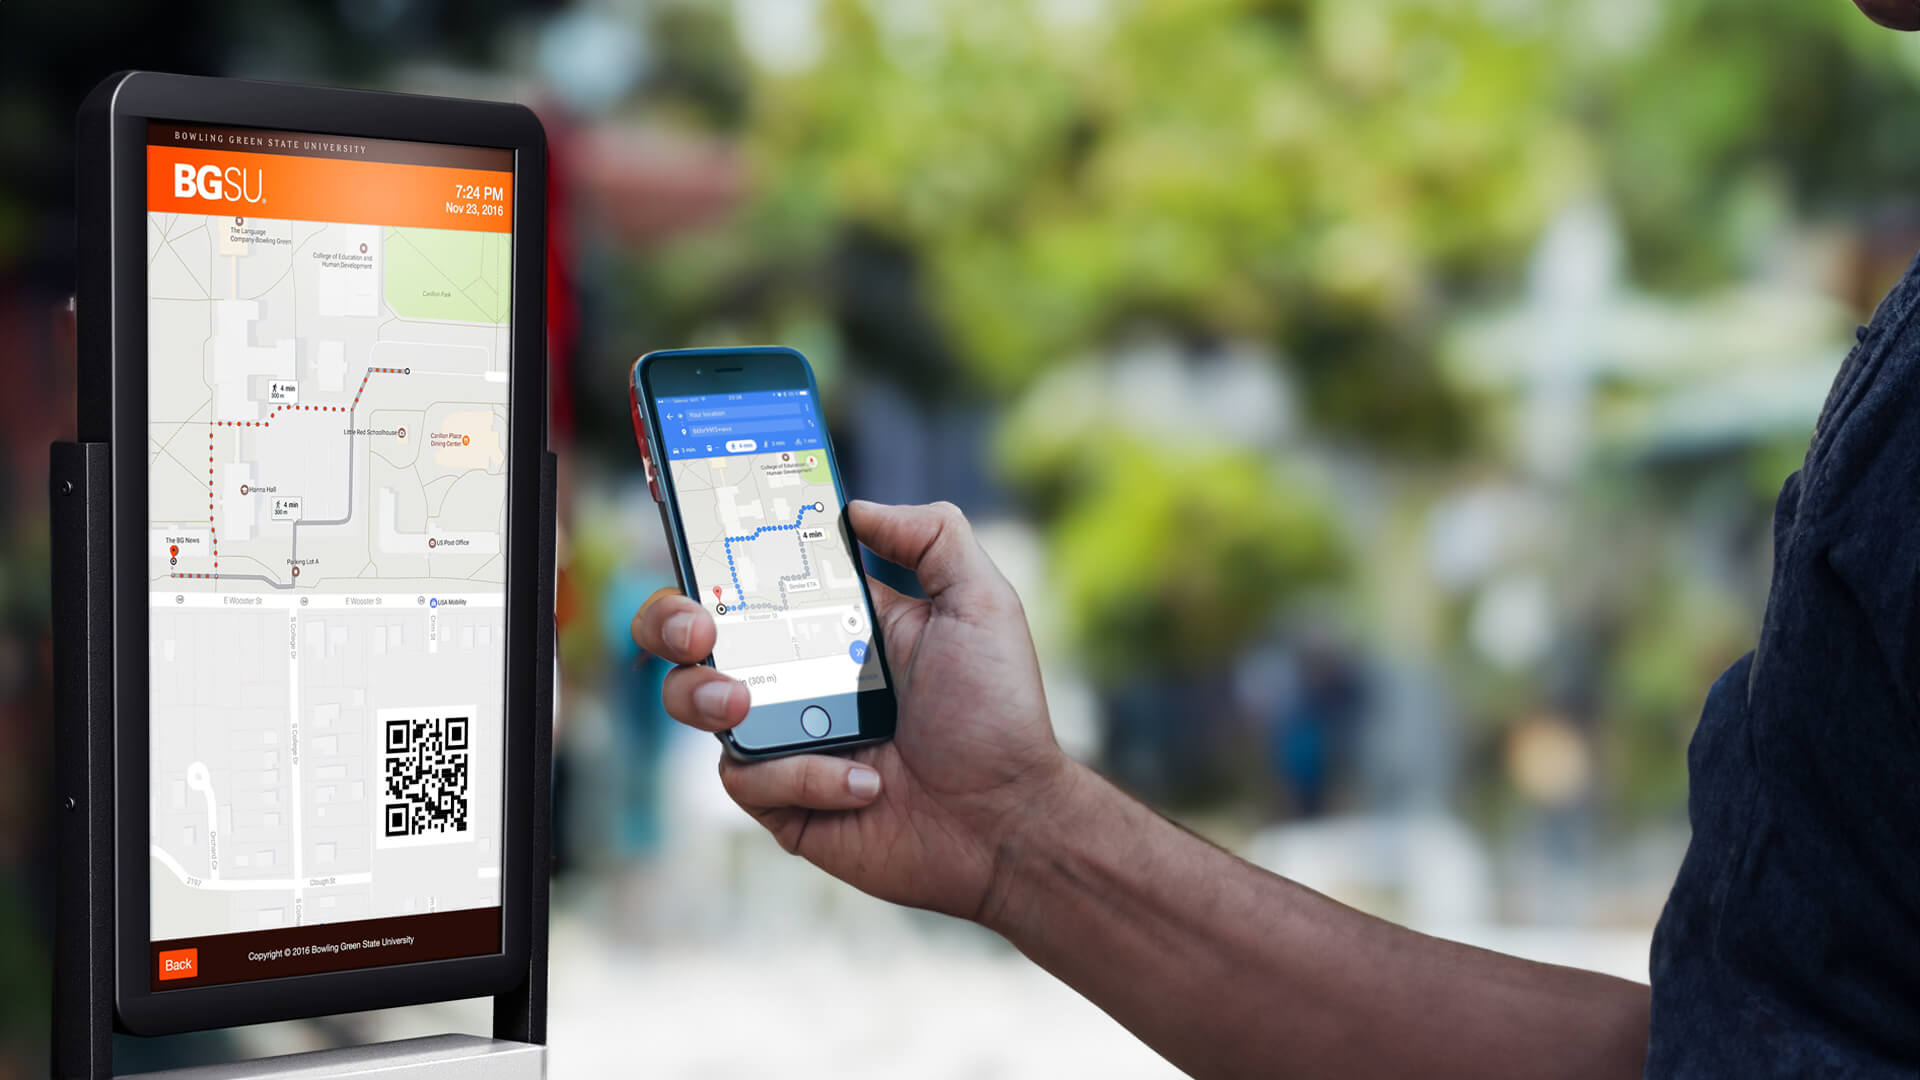 Digital wayfinding systems seamlessly integrating with mobile devices.